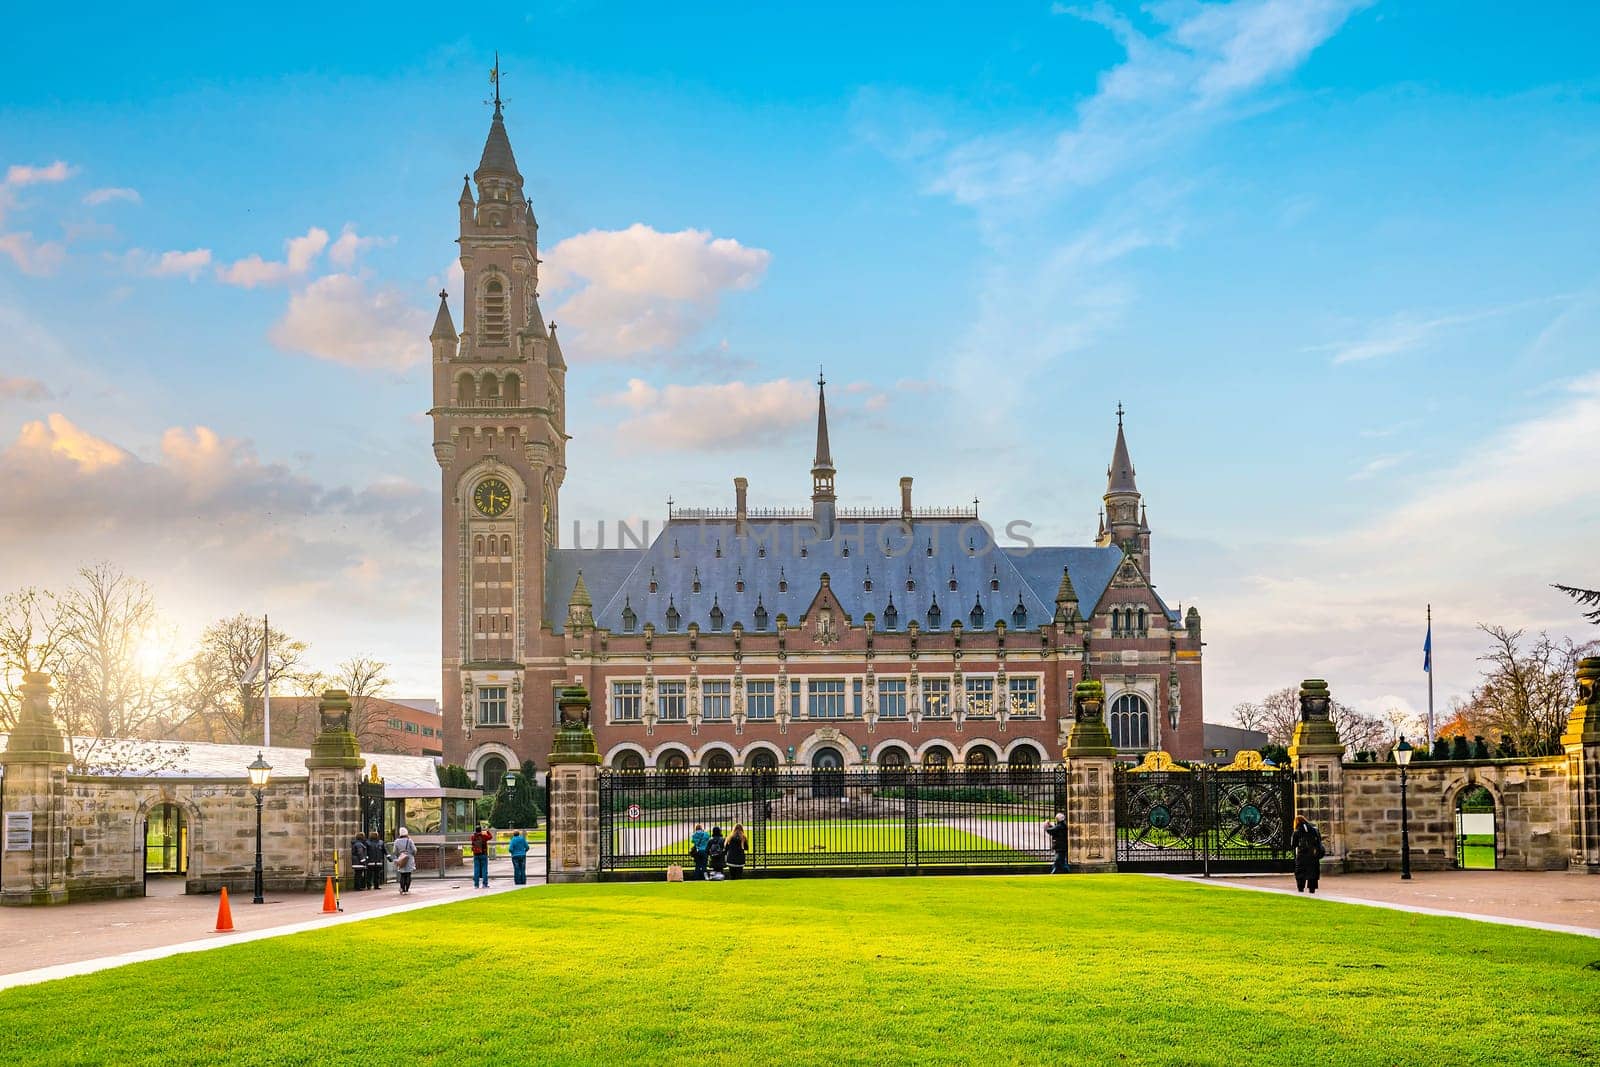 The International Court of Justice in the Peace Palace in Hague by f11photo